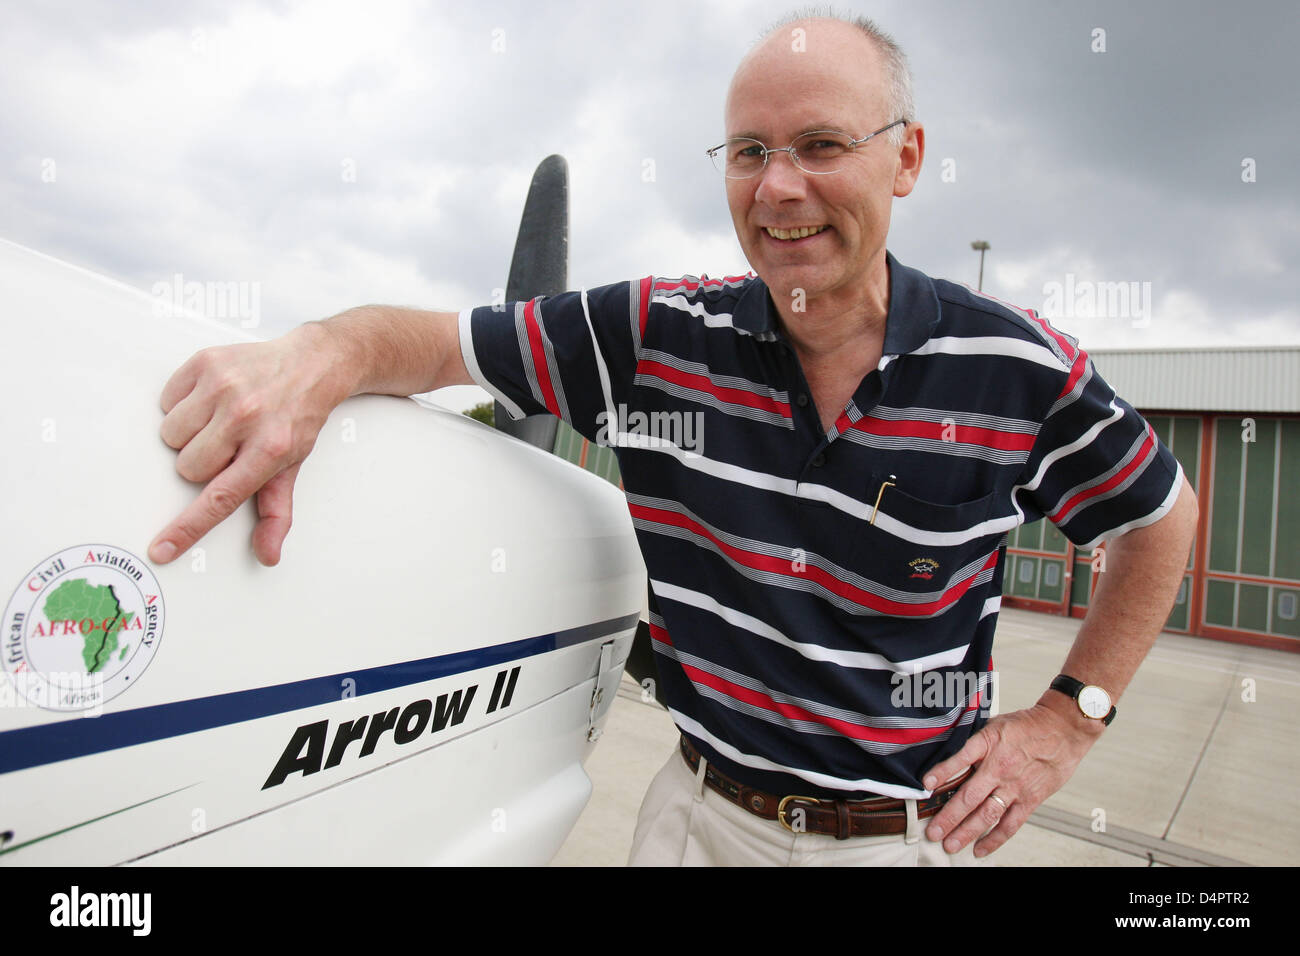 German Jochen Behtke poses in front of his single engined Piper PA 28 aircraft at the airport in Hamburg, Germany, 21 August 2009. One day later Behtke took off for a solo flight across the African continent to South Africa. On 02 September 2009 after 55 flight hours he called German press agency DPA and reported a safe landing in Capetown at 14:30 local time. 48 year-old Behtke li Stock Photo